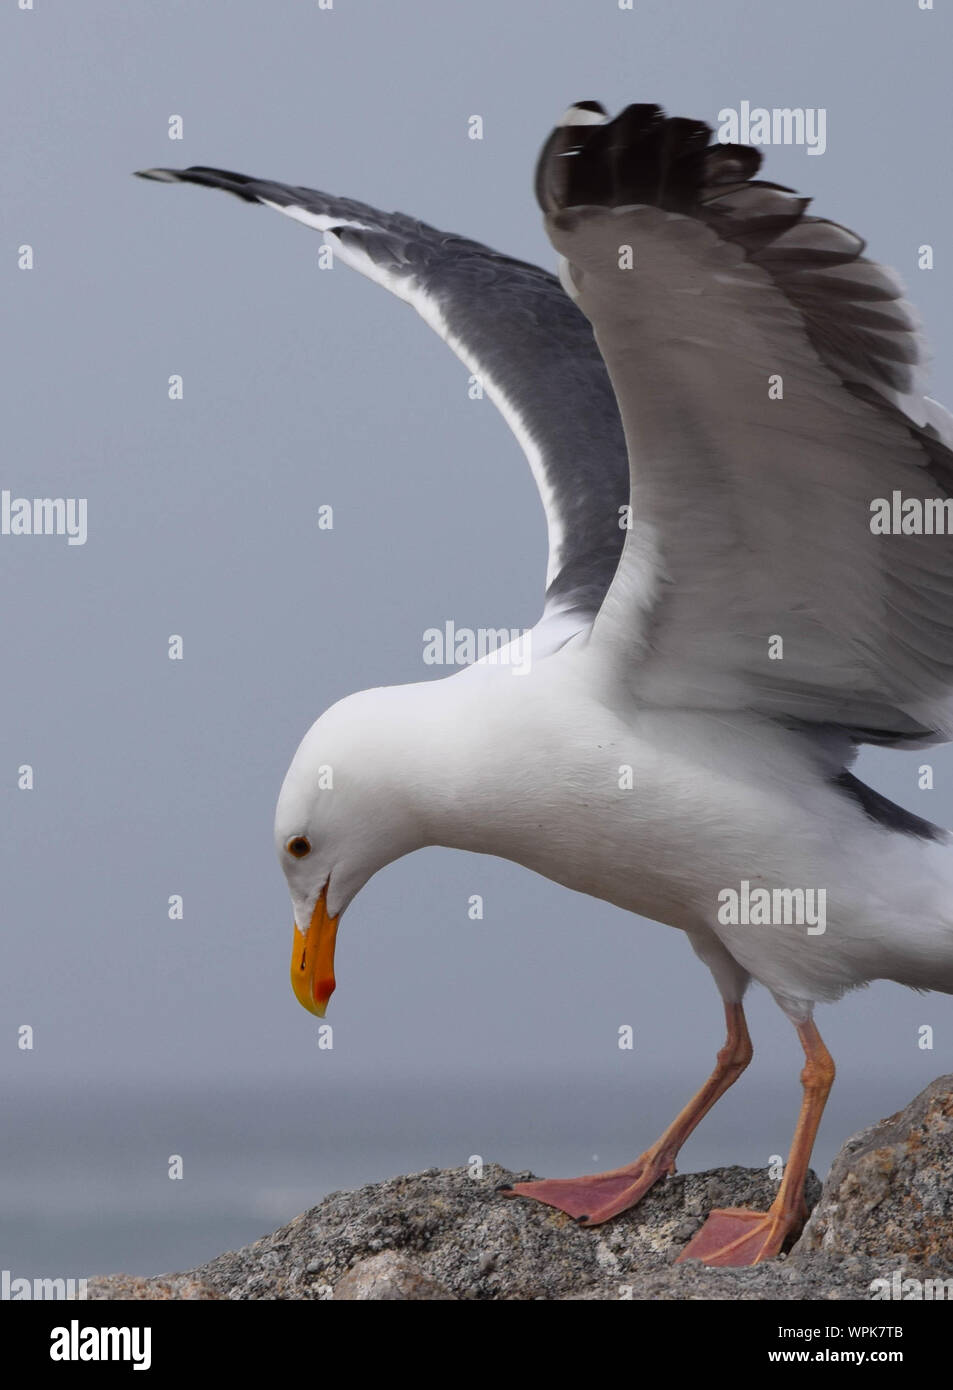 Close-up Of Seagull On Rock Stock Photo